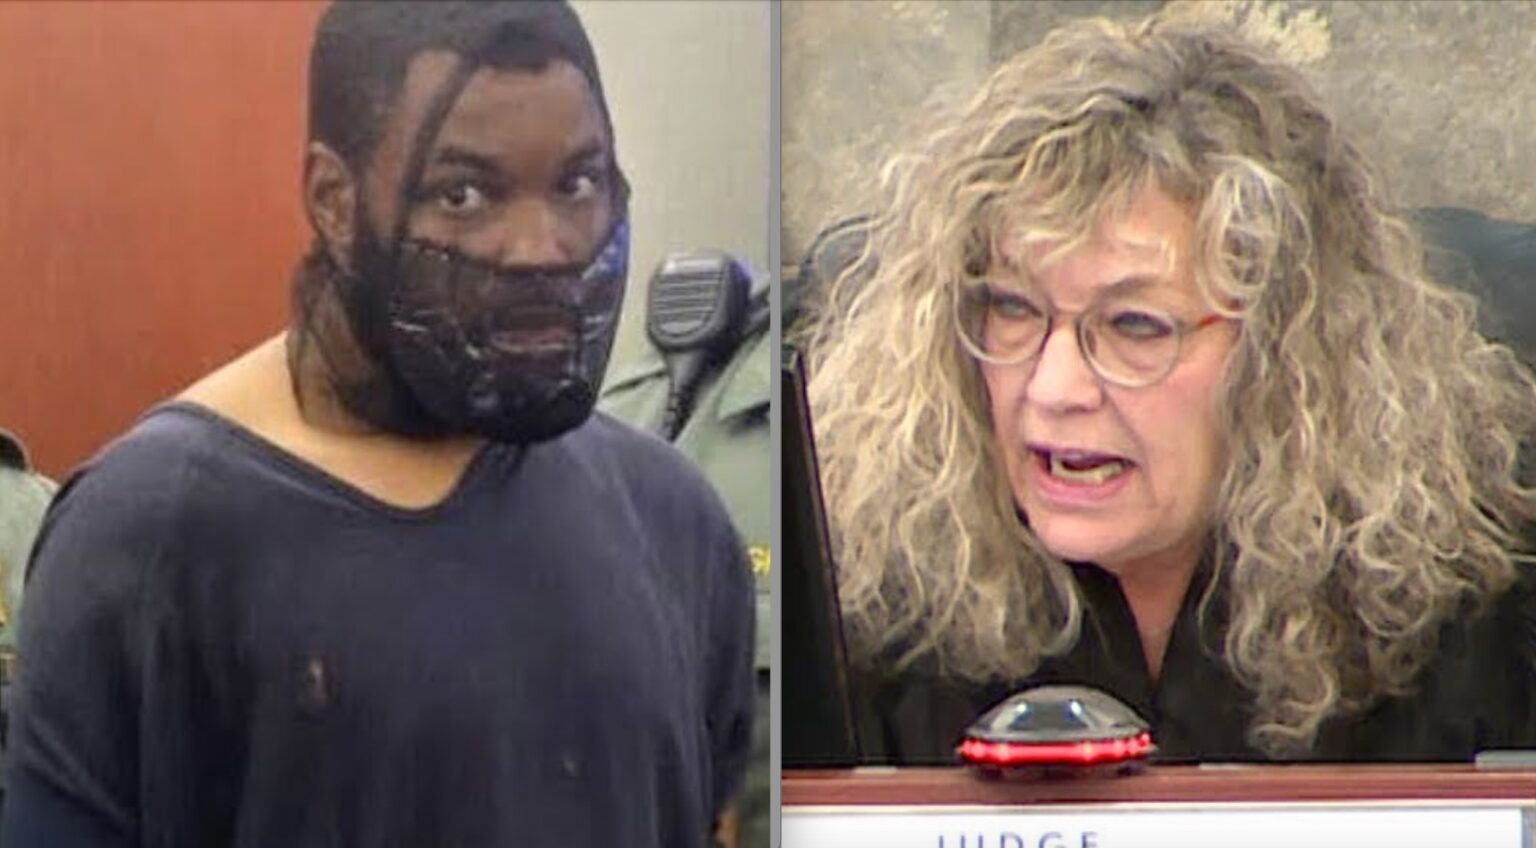 Man Who Attacked Judge in Court Returns Wearing a Facemask to Be